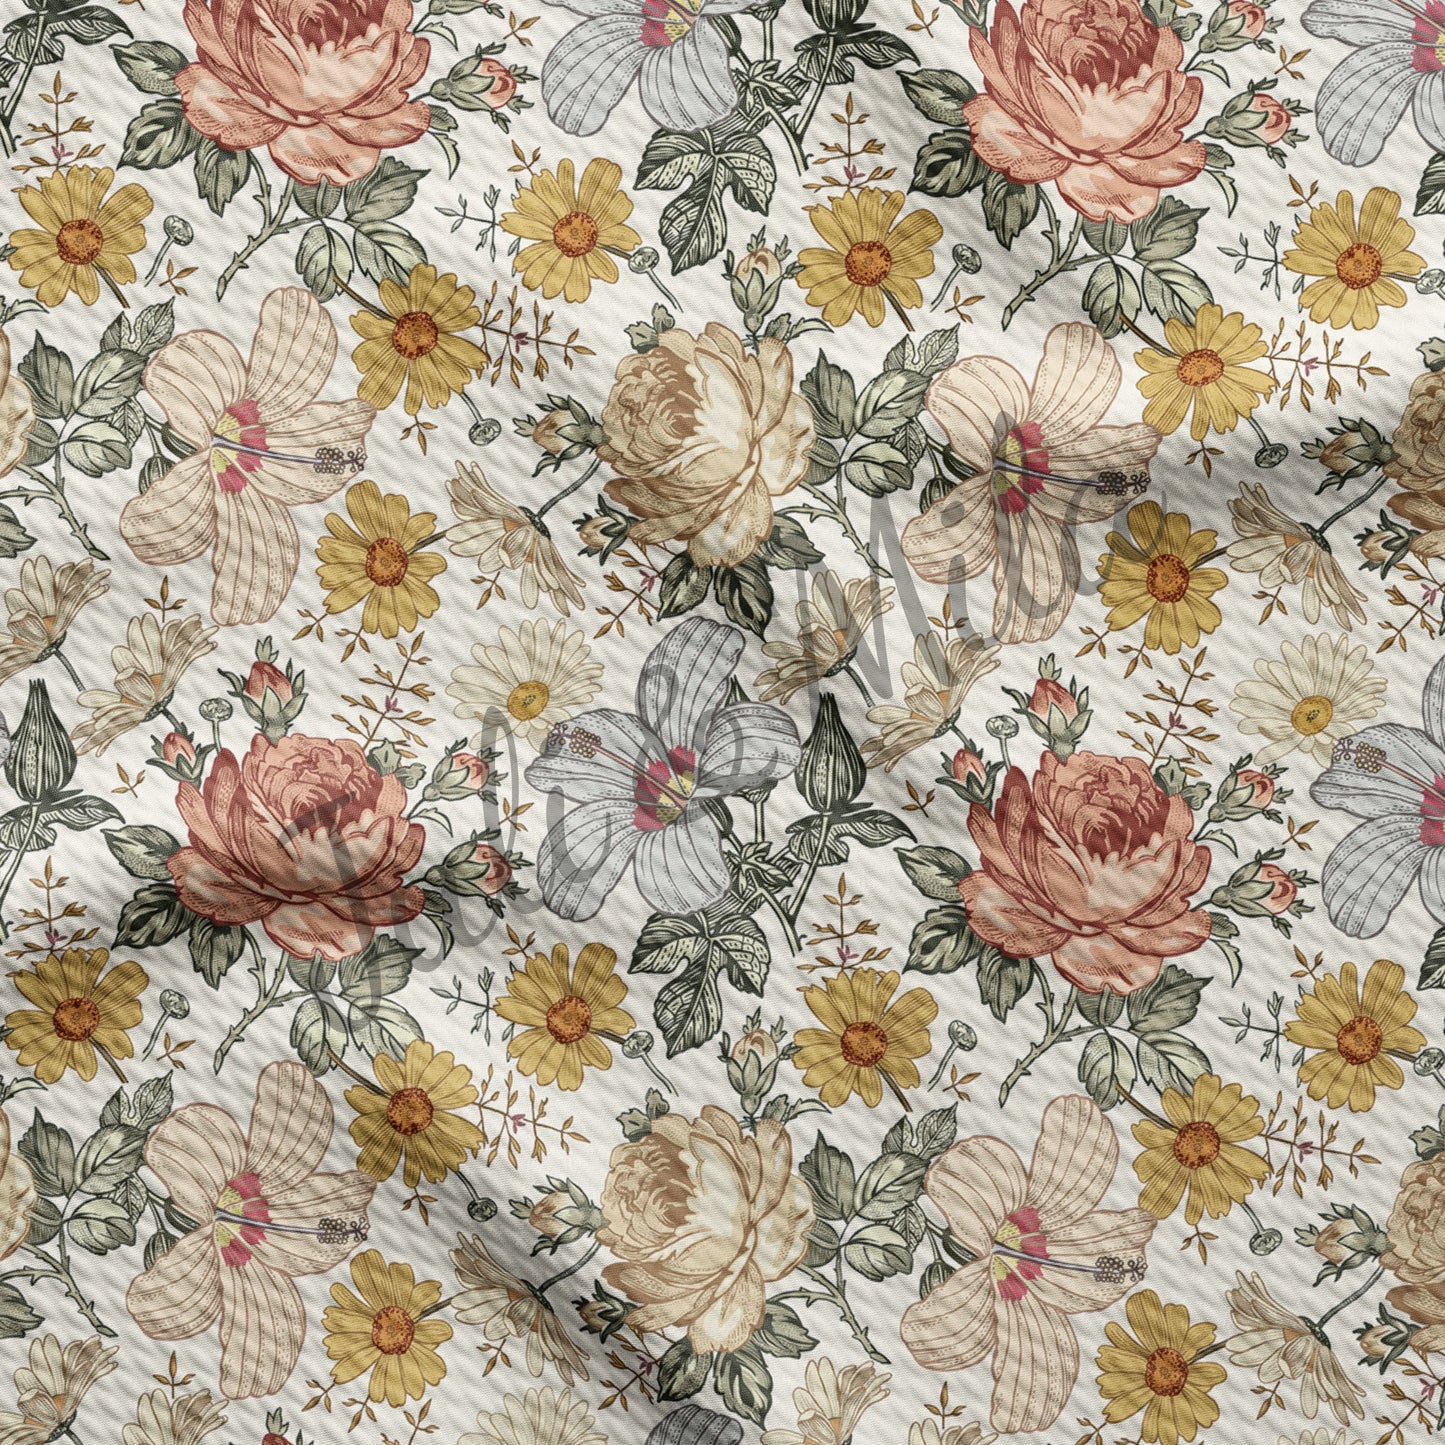 Floral  Bullet Textured Fabric  Roses(F12)